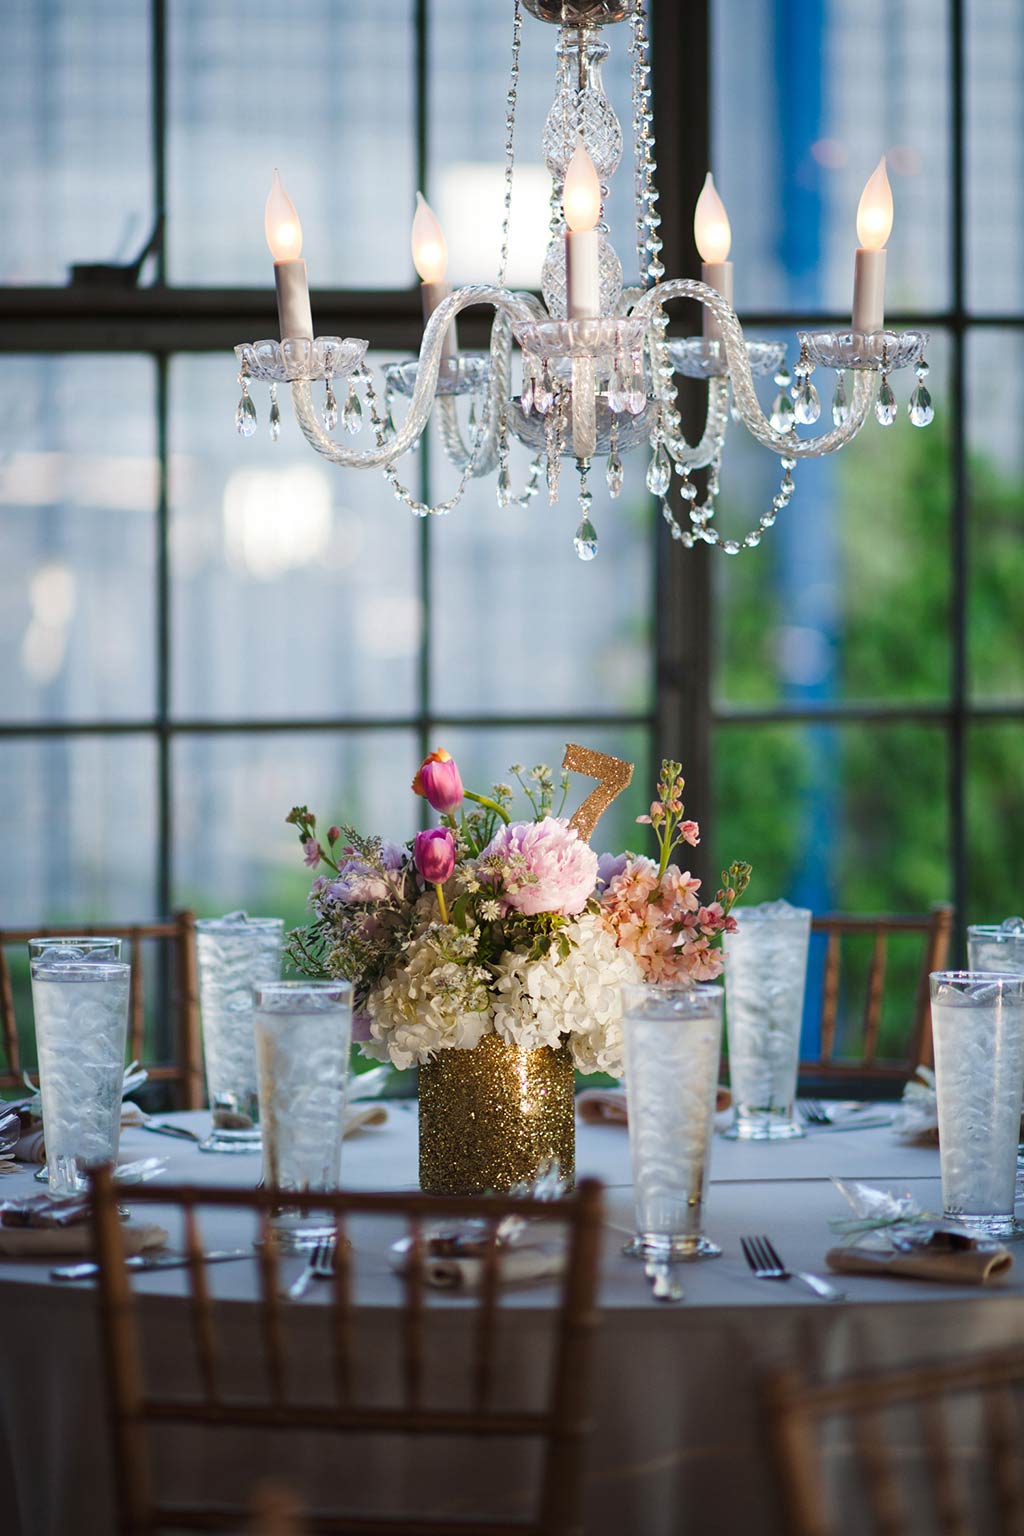 Chandelier above Wedding Reception Table